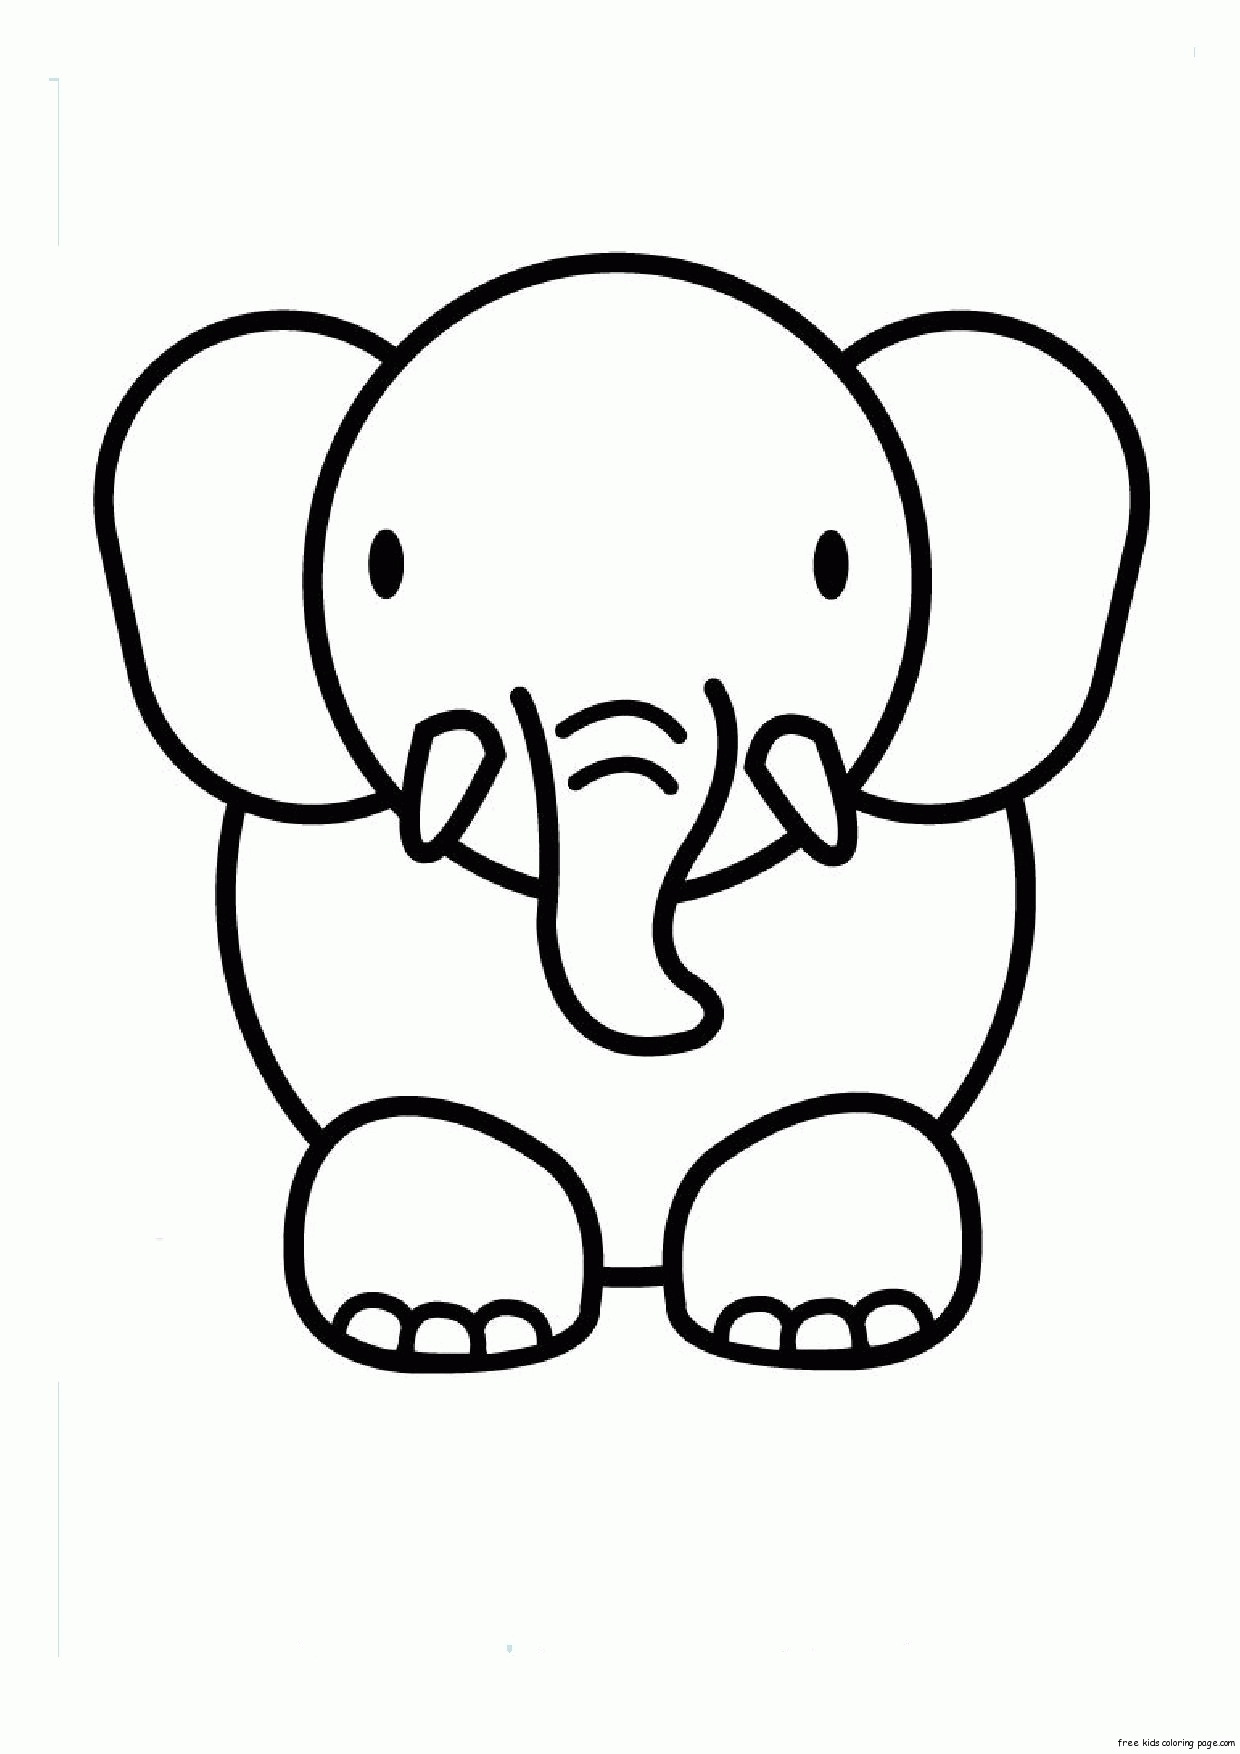 Cartoon Animal Coloring Pages Christmas - Coloring Pages For All Ages